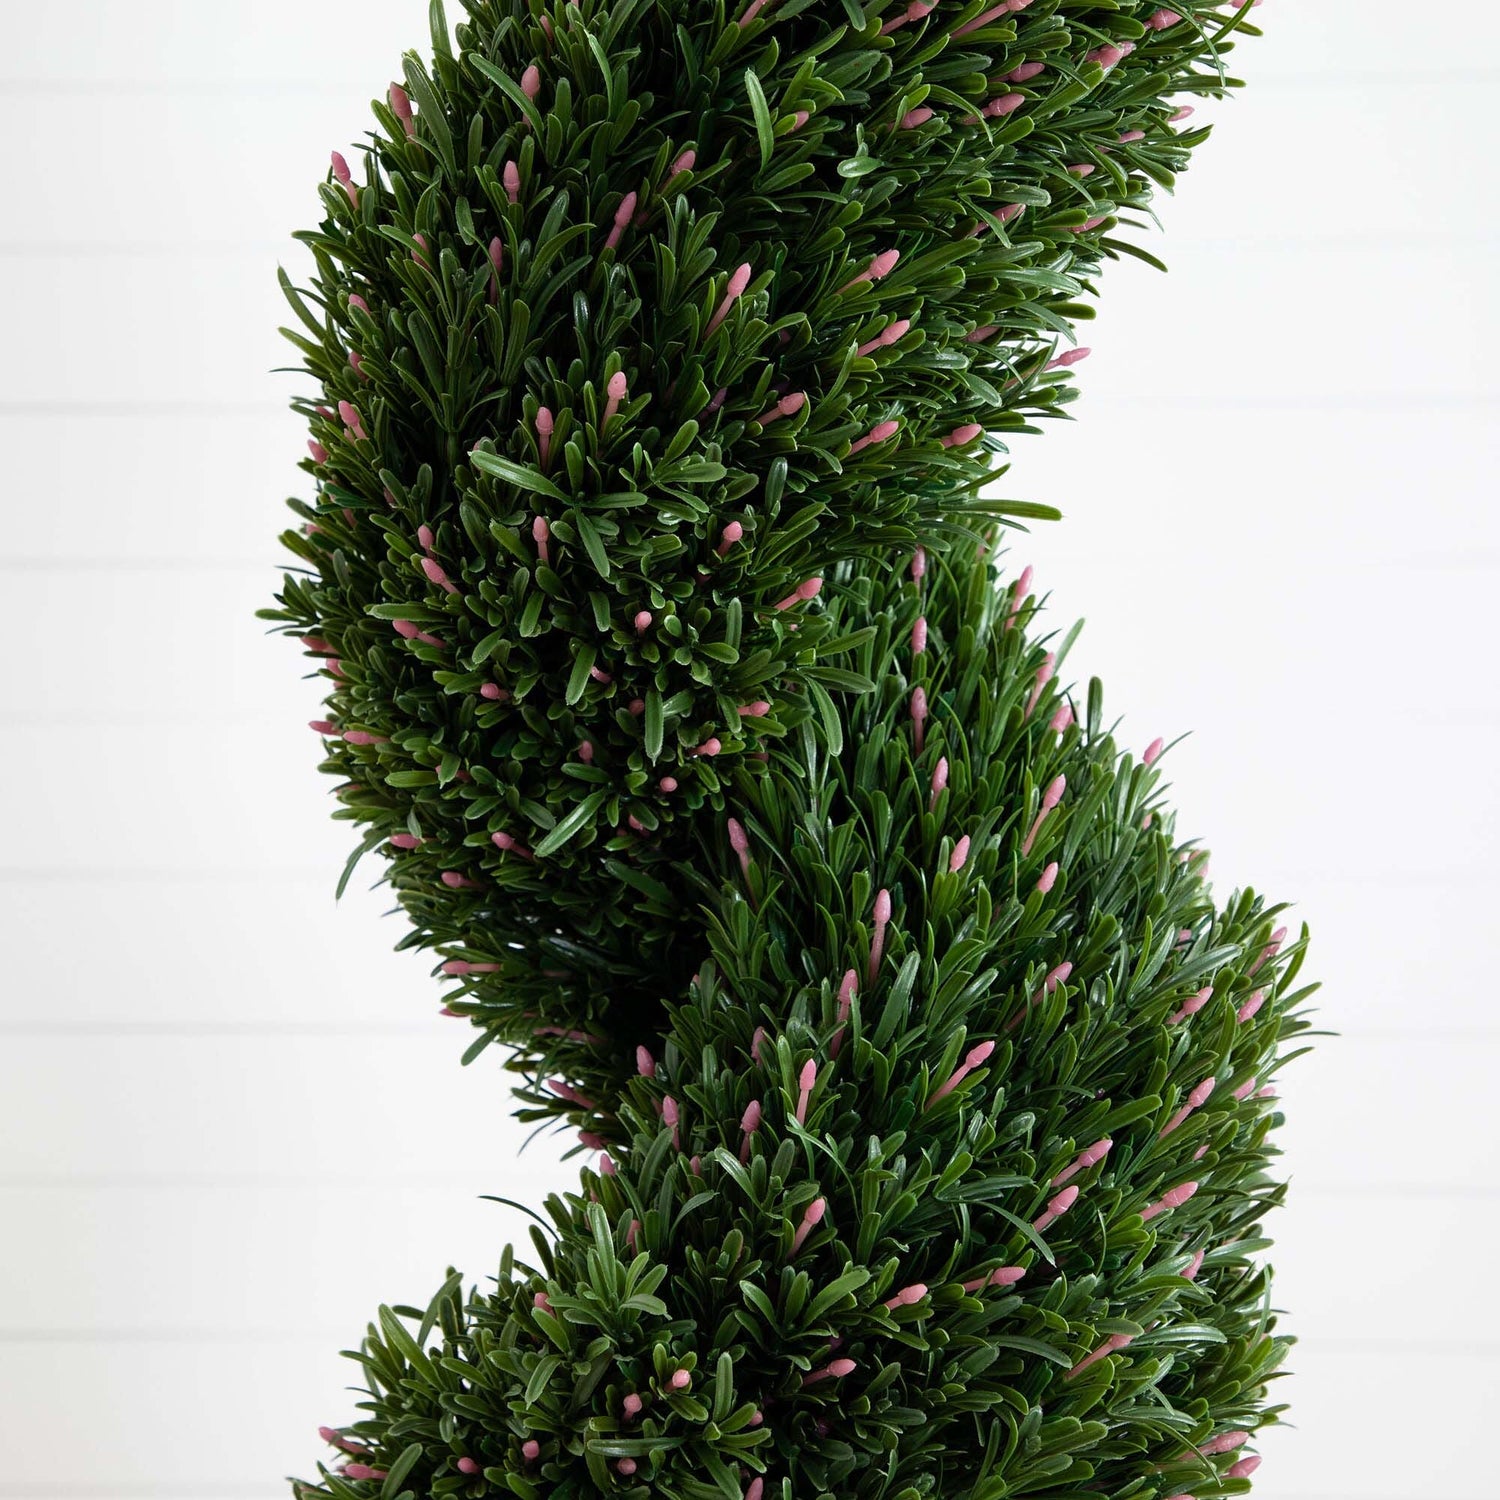 7' UV Resistant Artificial Rosemary Spiral Topiary Tree (Indoor/Outdoor)